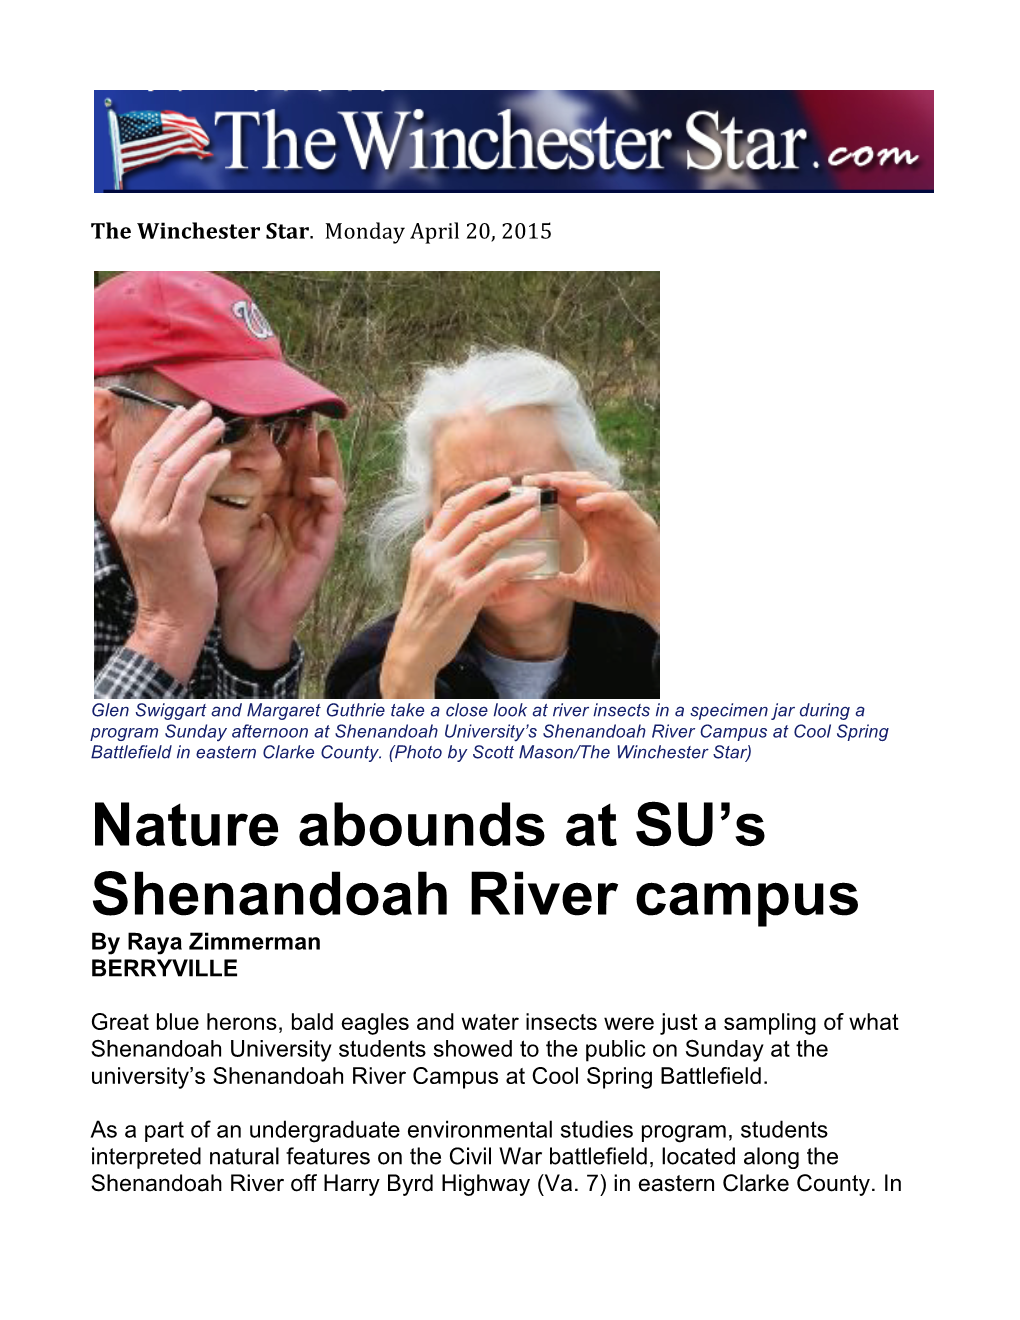 Nature Abounds at SU's Shenandoah River Campus